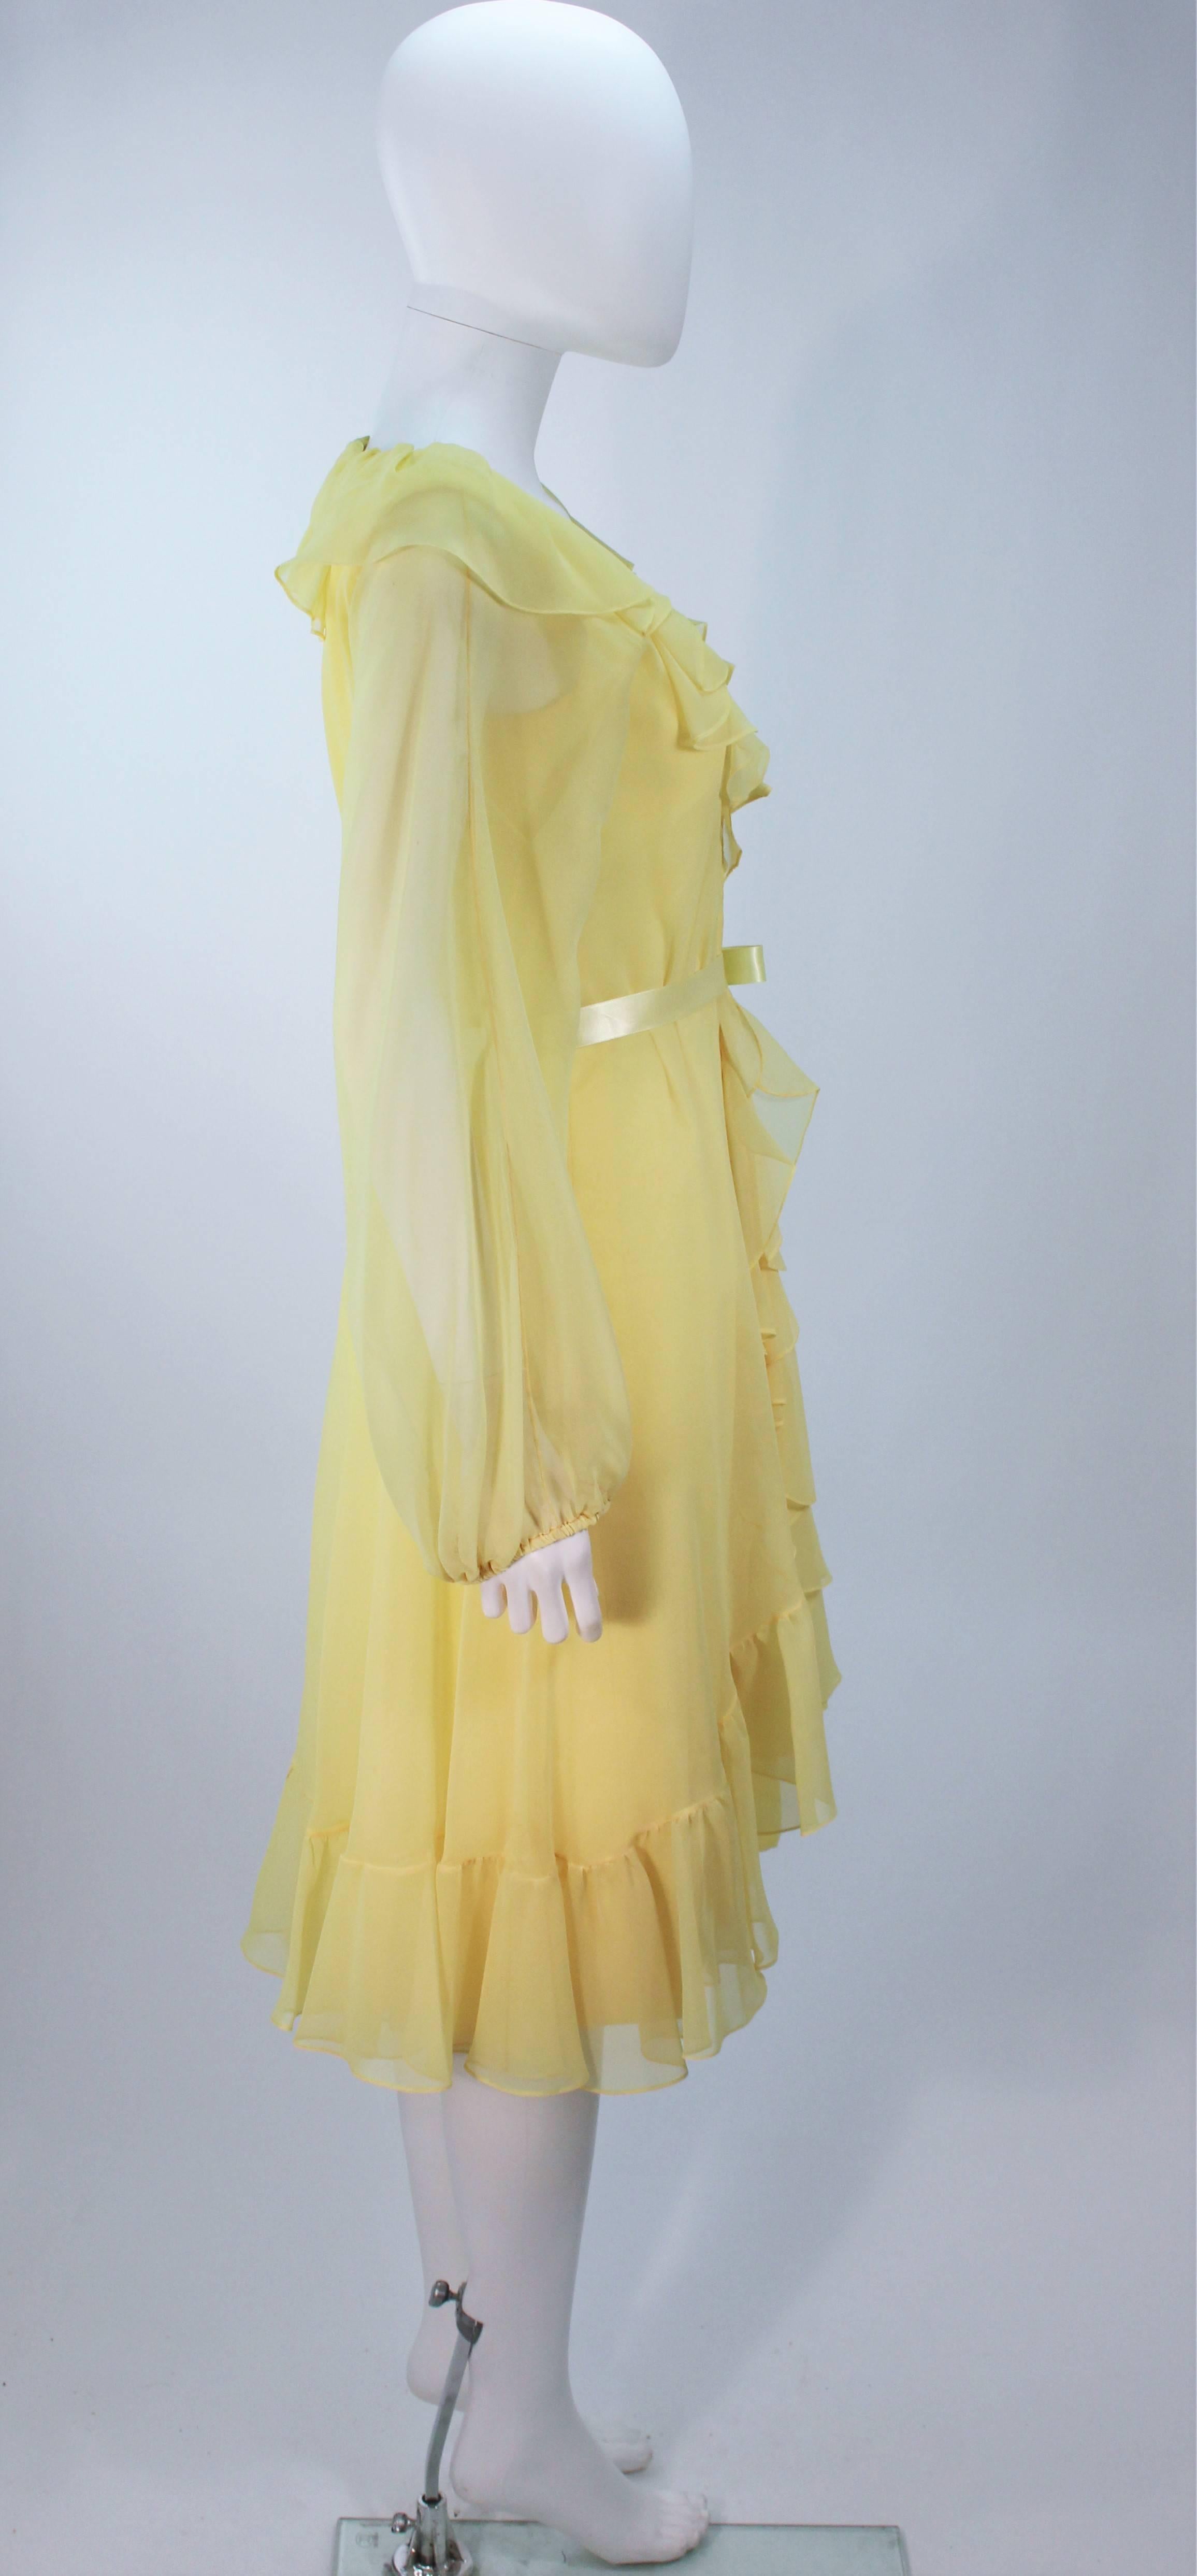 Beige TRAVILLA Yellow Ruffled Chiffon Dress with Billow Sleeves Size 8 For Sale